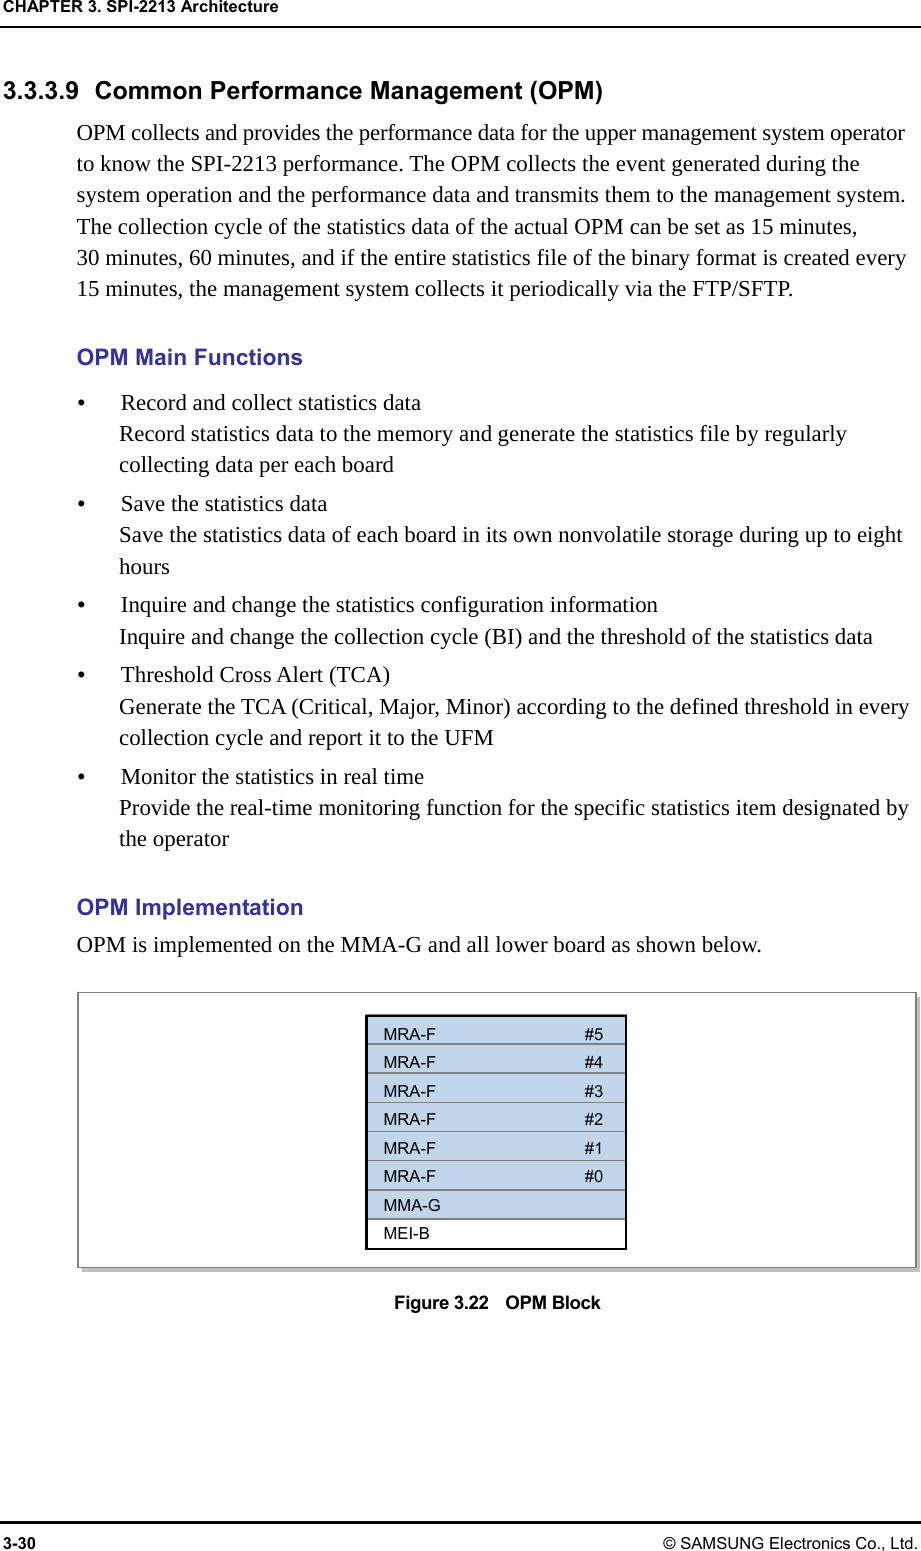 CHAPTER 3. SPI-2213 Architecture 3-30 © SAMSUNG Electronics Co., Ltd. 3.3.3.9  Common Performance Management (OPM) OPM collects and provides the performance data for the upper management system operator to know the SPI-2213 performance. The OPM collects the event generated during the system operation and the performance data and transmits them to the management system. The collection cycle of the statistics data of the actual OPM can be set as 15 minutes,   30 minutes, 60 minutes, and if the entire statistics file of the binary format is created every 15 minutes, the management system collects it periodically via the FTP/SFTP.  OPM Main Functions y Record and collect statistics data Record statistics data to the memory and generate the statistics file by regularly collecting data per each board y Save the statistics data Save the statistics data of each board in its own nonvolatile storage during up to eight hours y Inquire and change the statistics configuration information Inquire and change the collection cycle (BI) and the threshold of the statistics data y Threshold Cross Alert (TCA) Generate the TCA (Critical, Major, Minor) according to the defined threshold in every collection cycle and report it to the UFM y Monitor the statistics in real time Provide the real-time monitoring function for the specific statistics item designated by the operator  OPM Implementation OPM is implemented on the MMA-G and all lower board as shown below.  Figure 3.22    OPM Block MRA-F #5 MRA-F #4 MRA-F #3 MRA-F #2 MRA-F #1 MRA-F #0 MMA-G MEI-B 